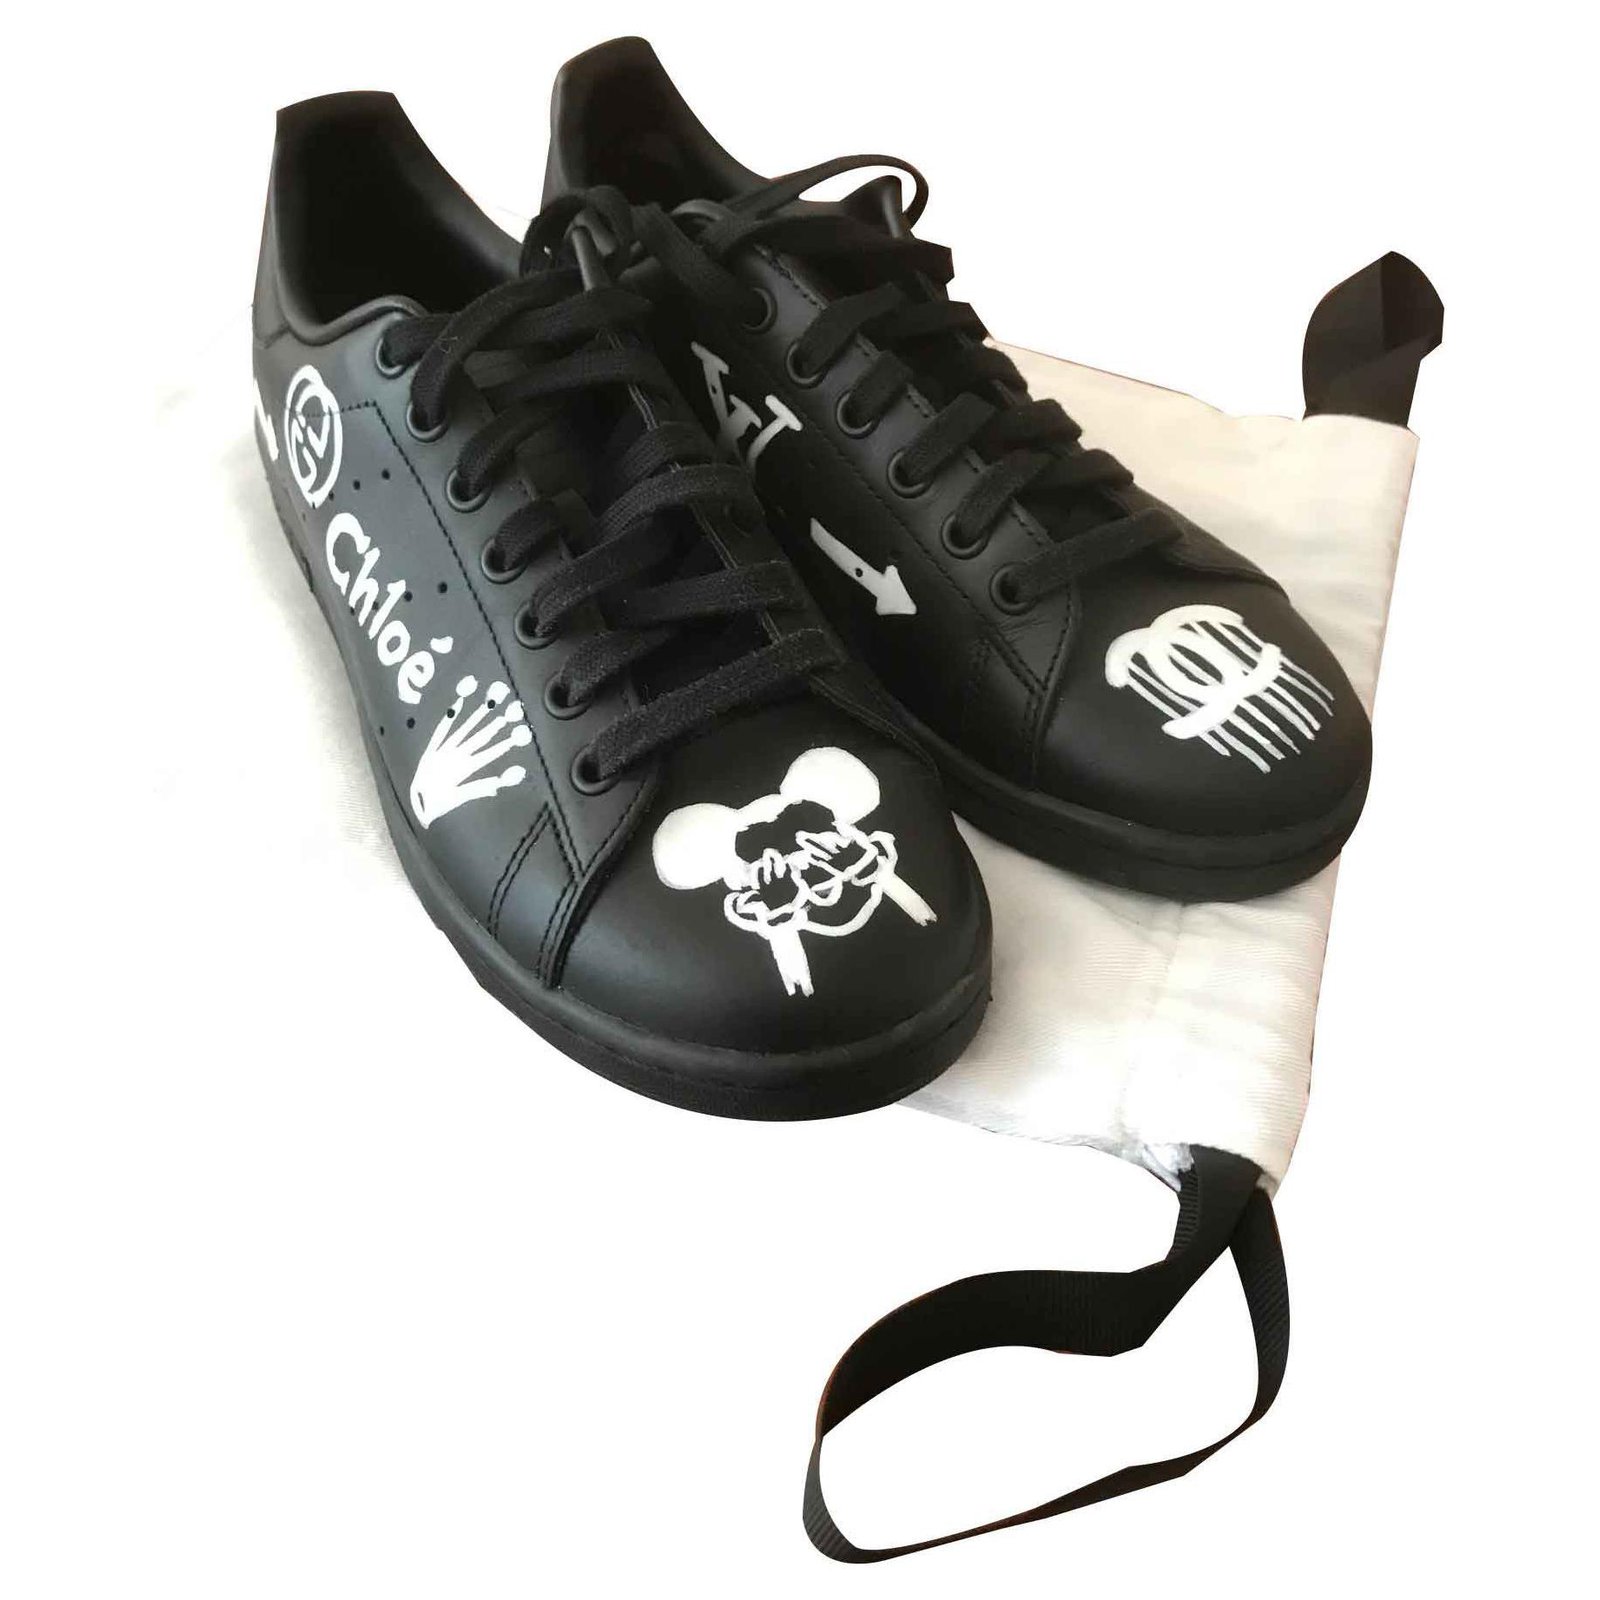 stan smith black limited edition